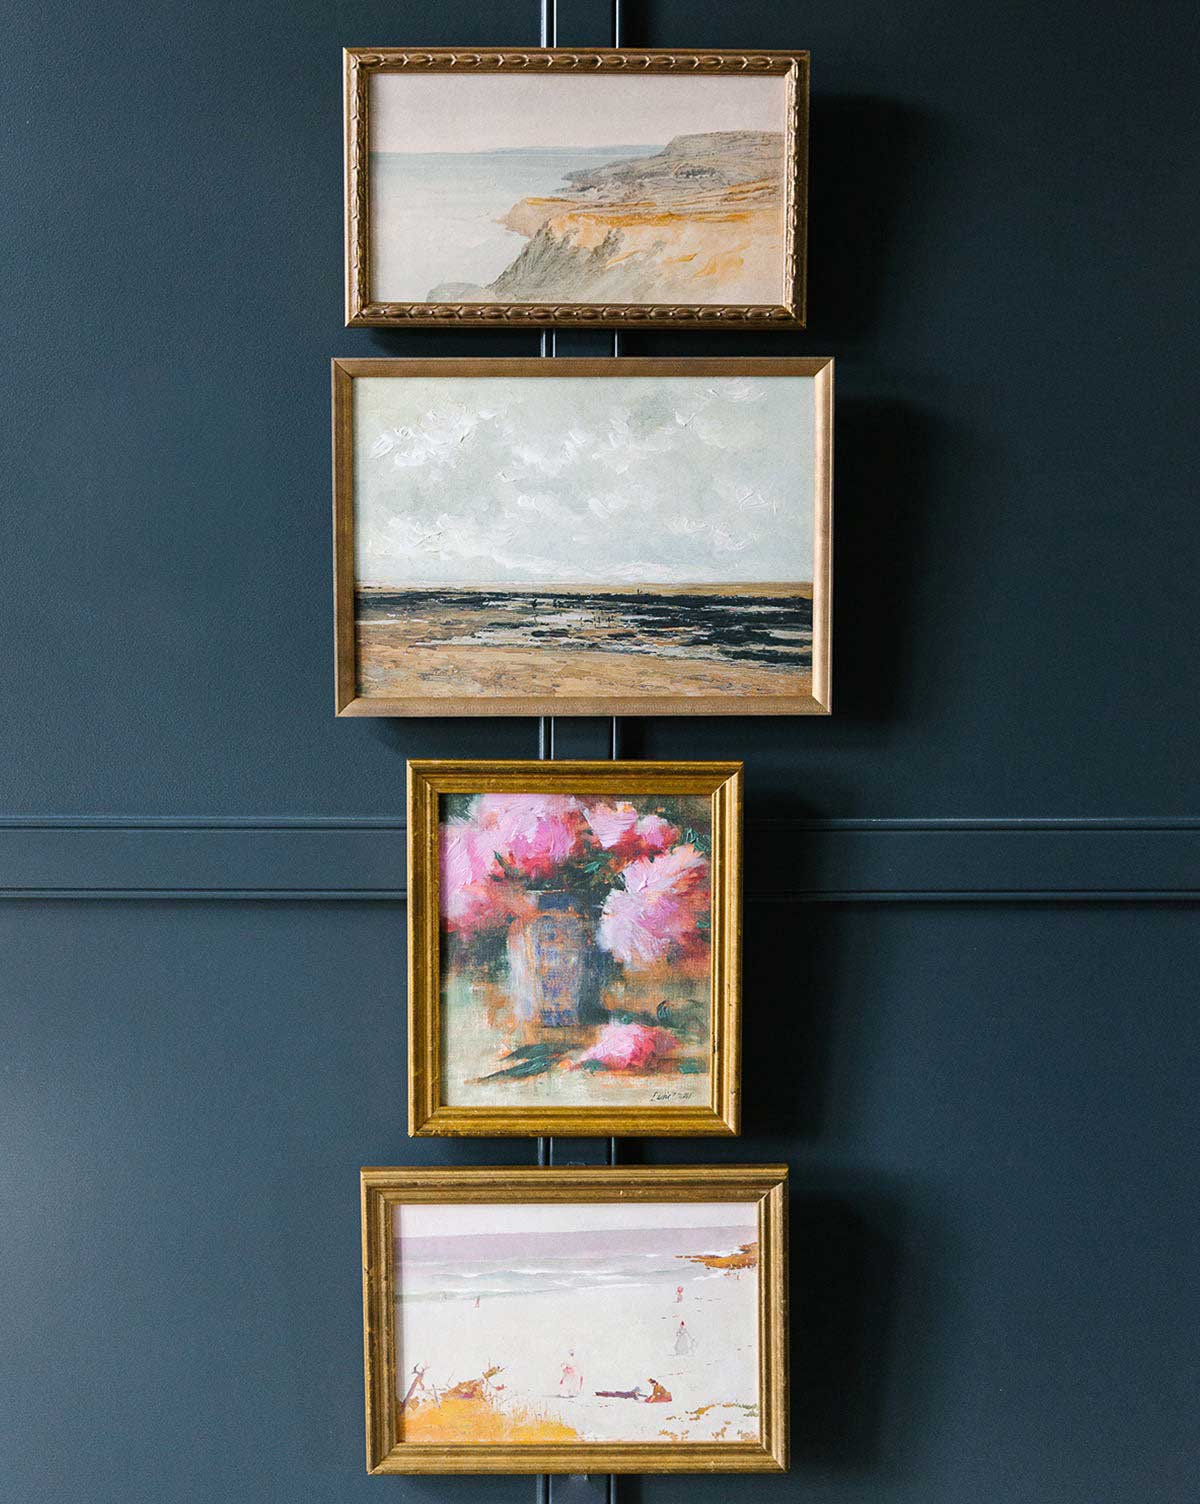 A gallery wall of four framed art pieces in a vertical stack